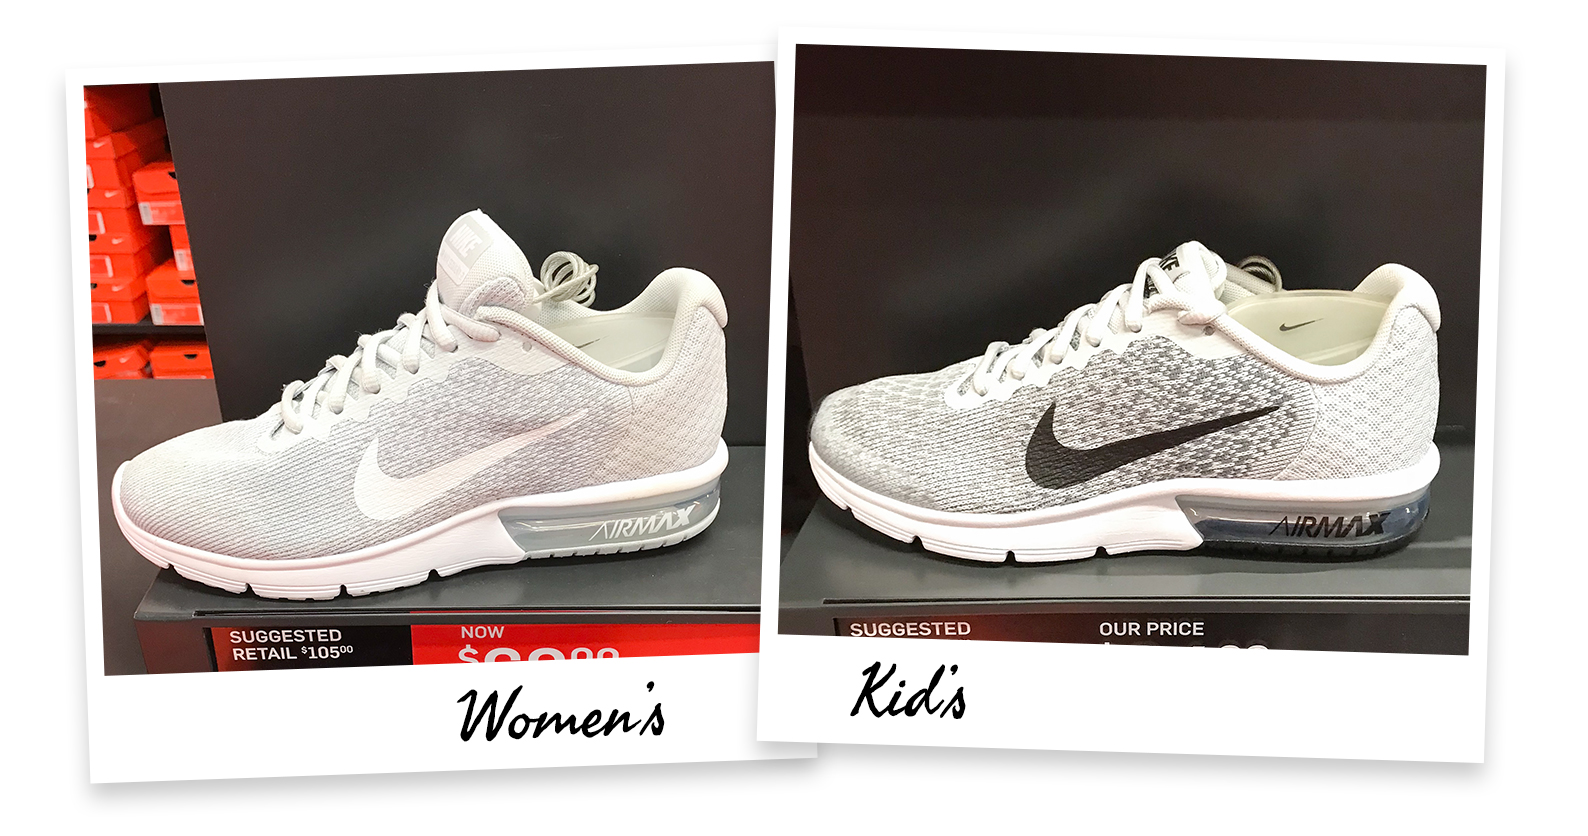 nike youth sizes to women's